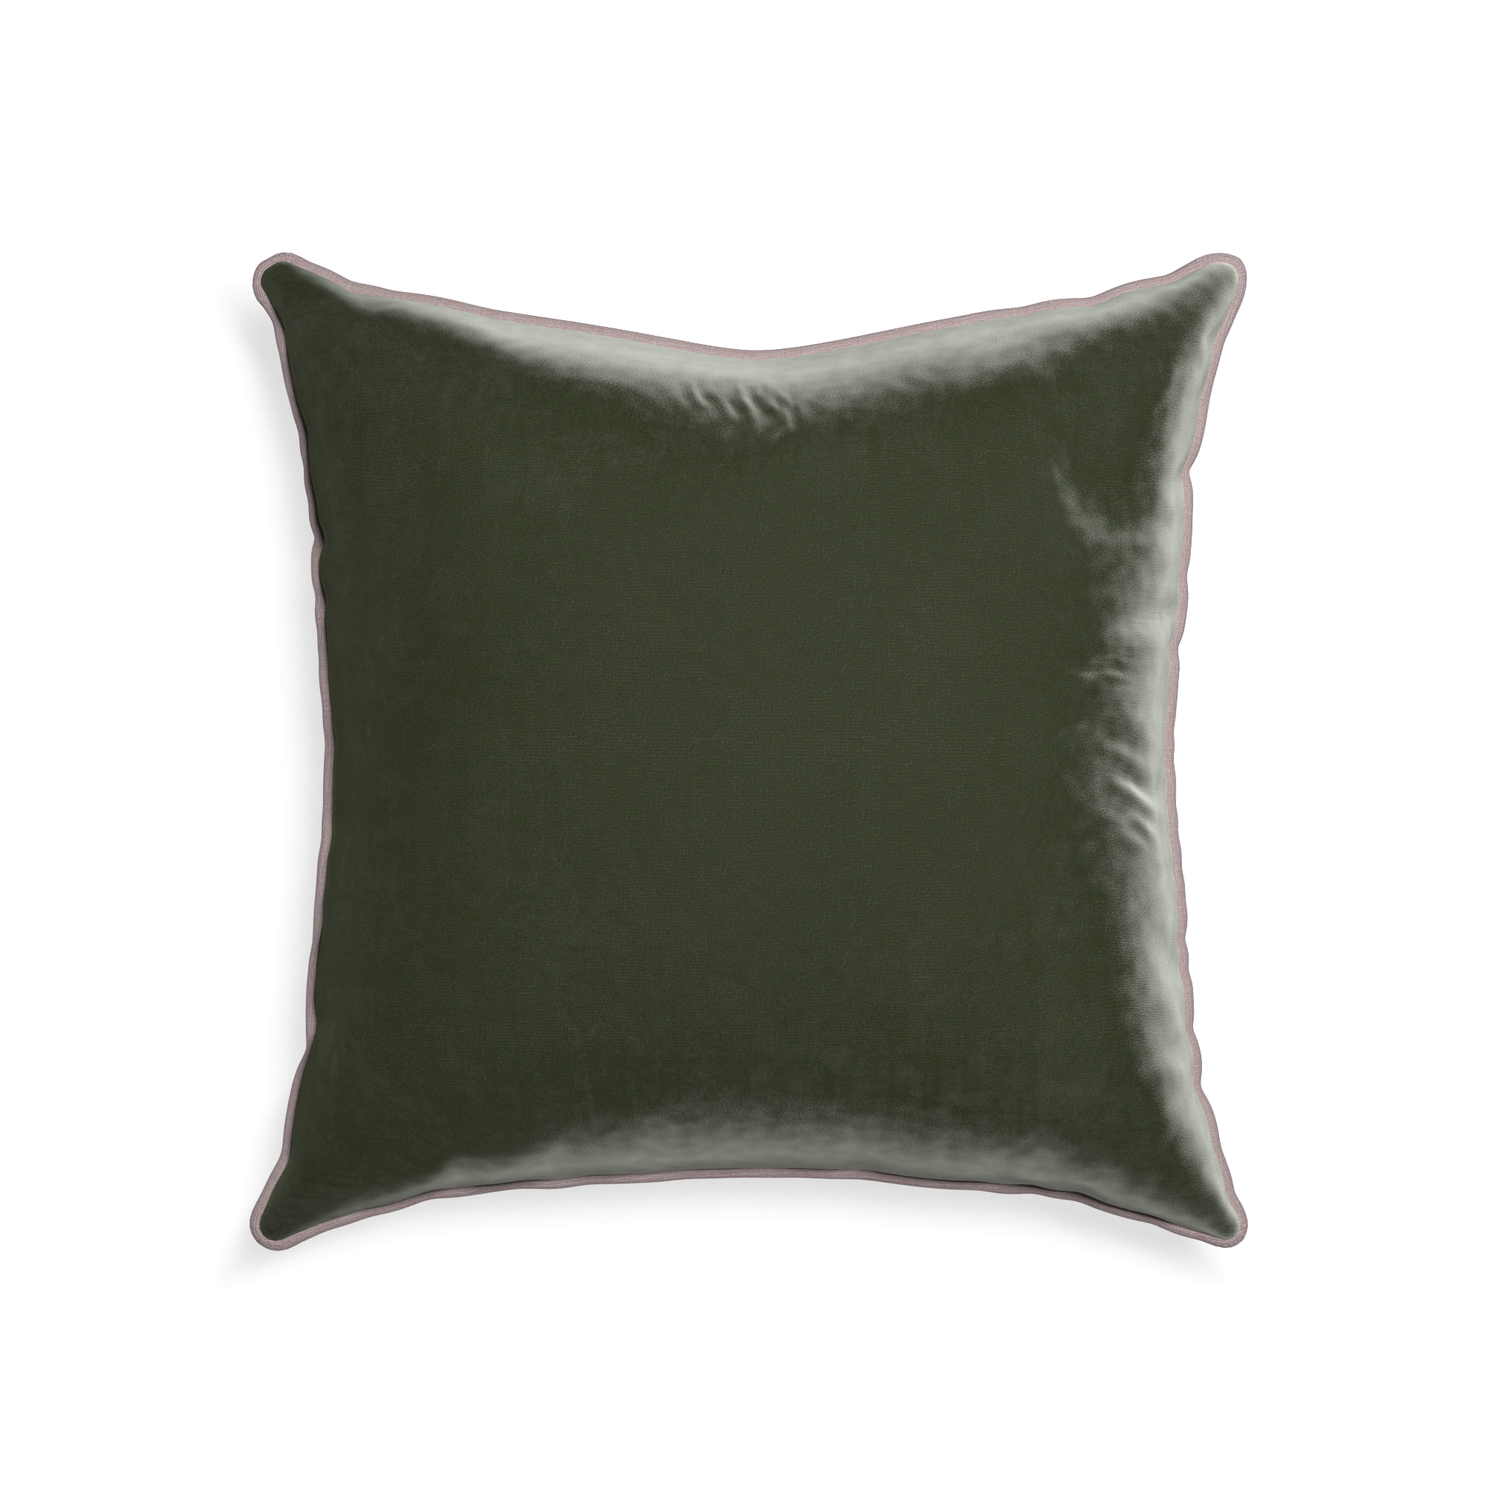 22-square fern velvet custom fern greenpillow with orchid piping on white background